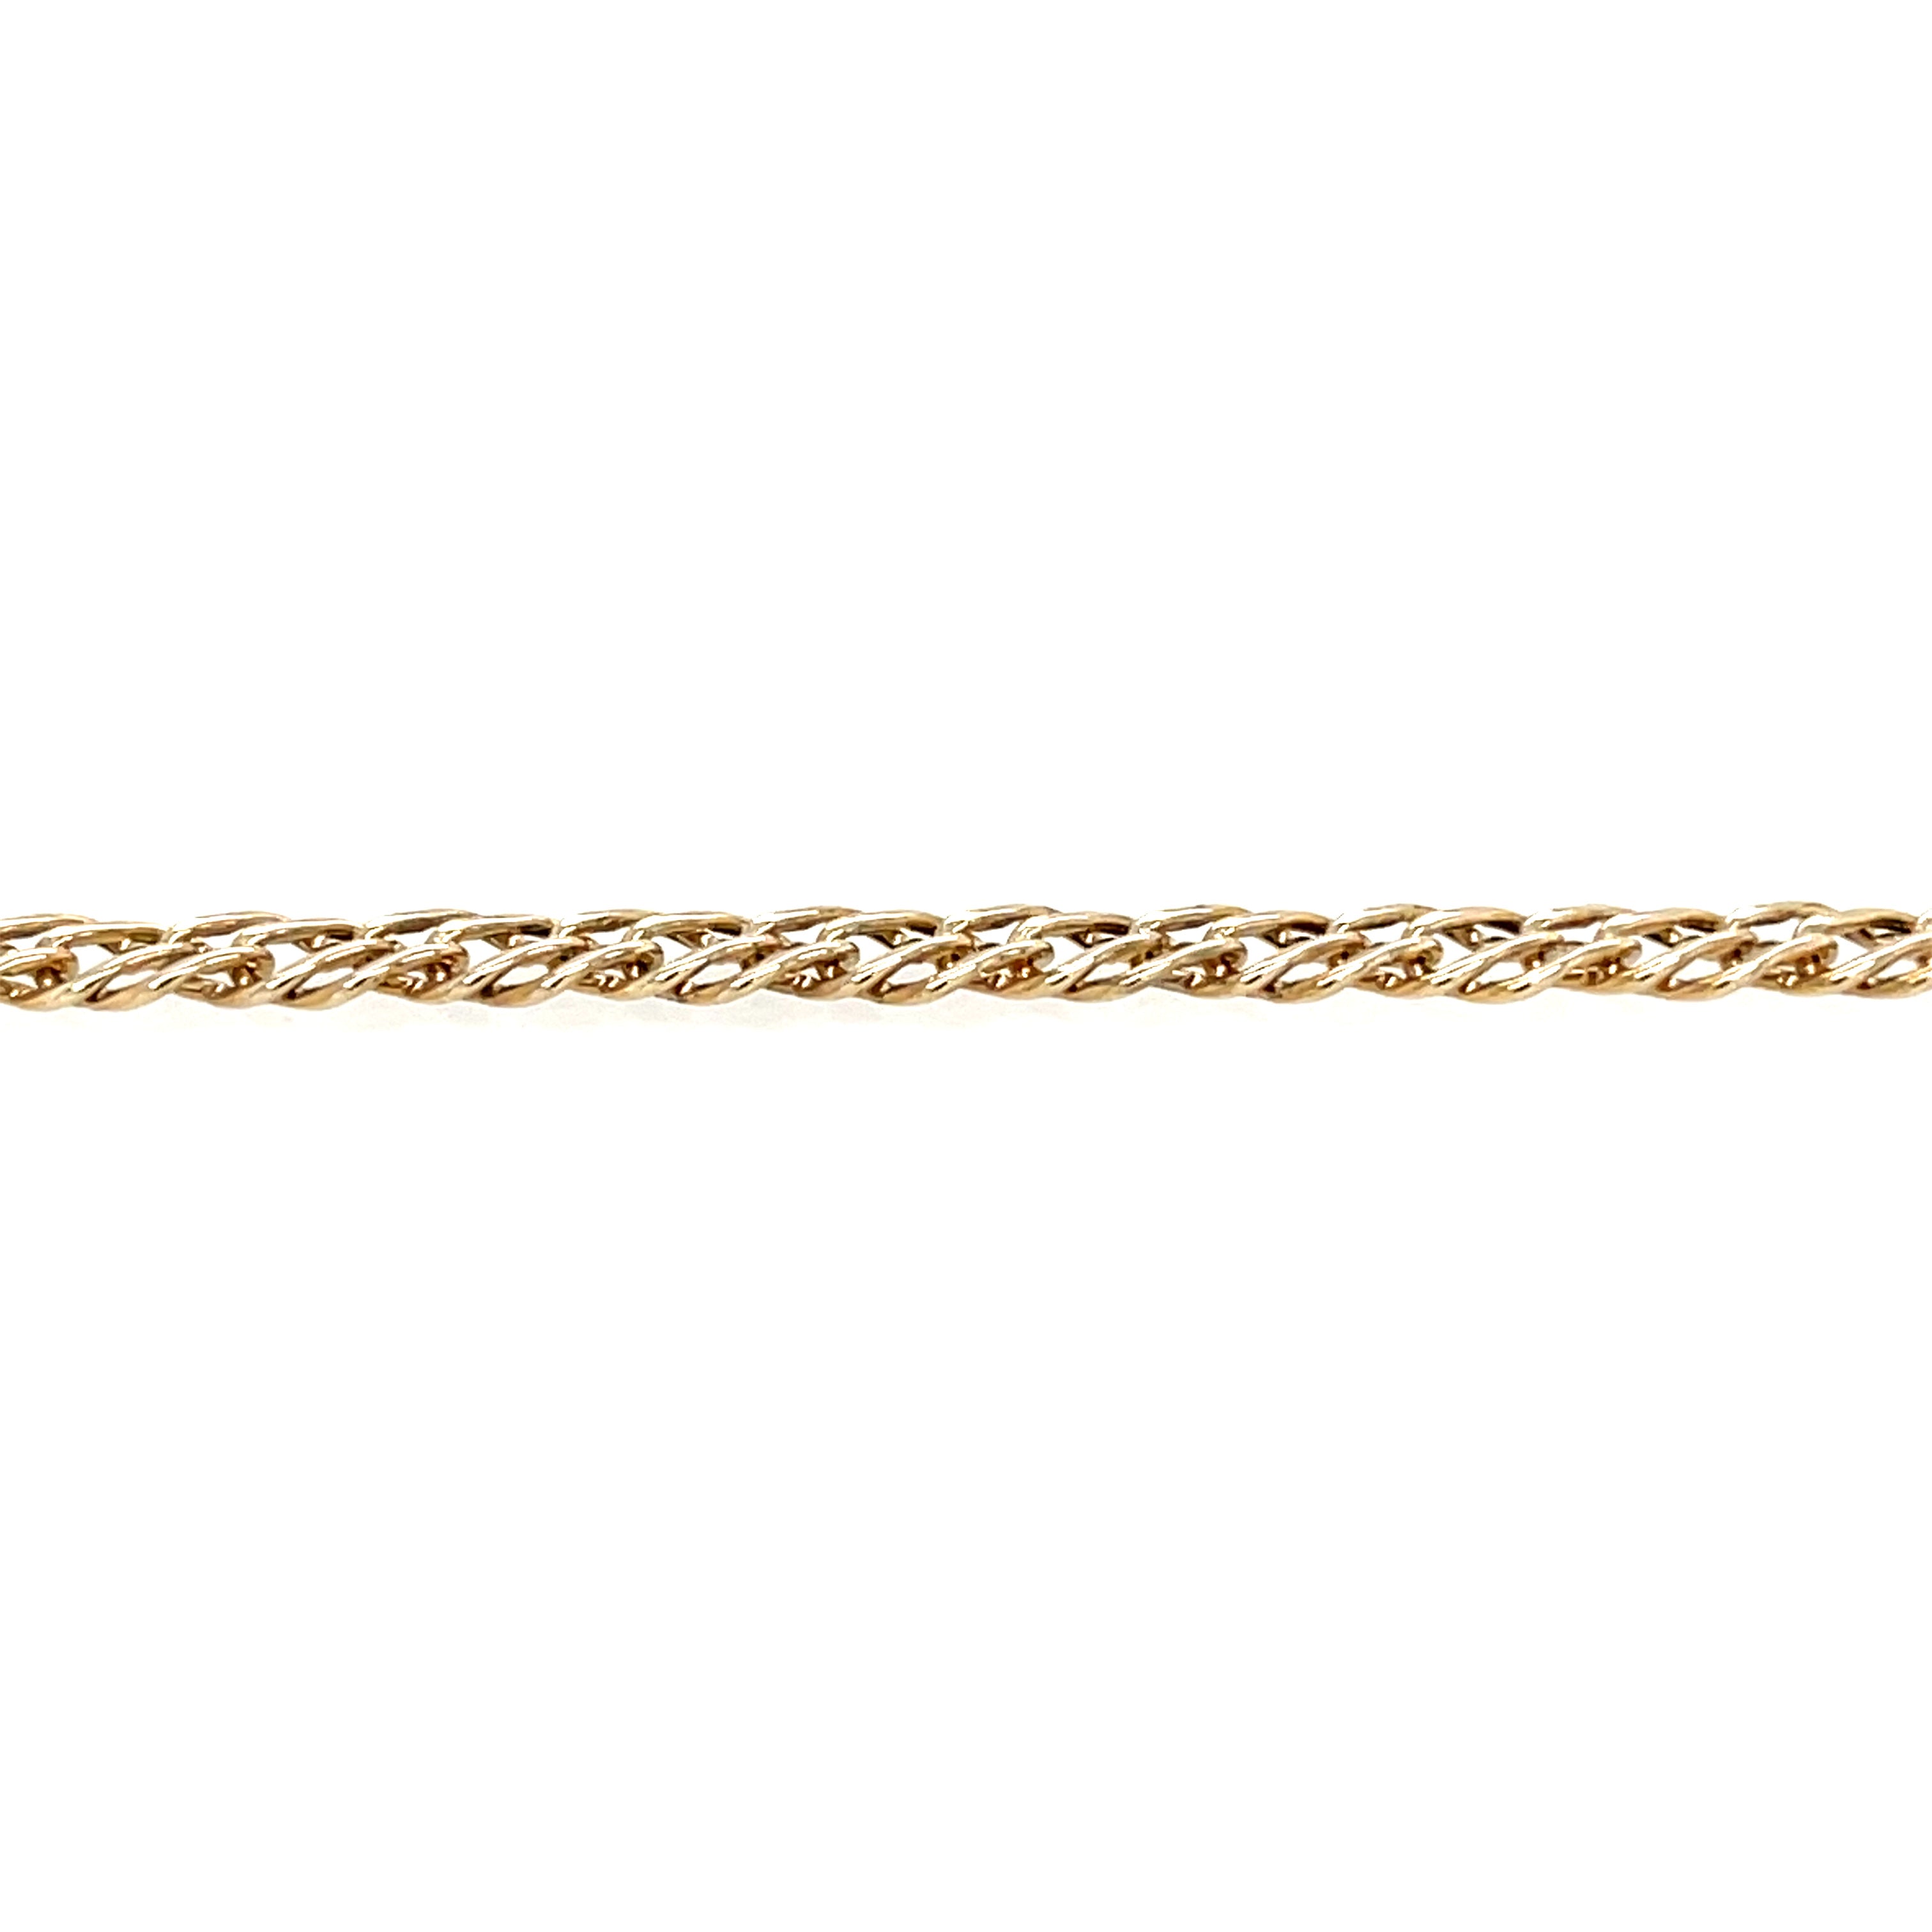 9ct Yellow Gold 7.5" Hollow Double Curb Link Bracelet - 1.70g SOLD